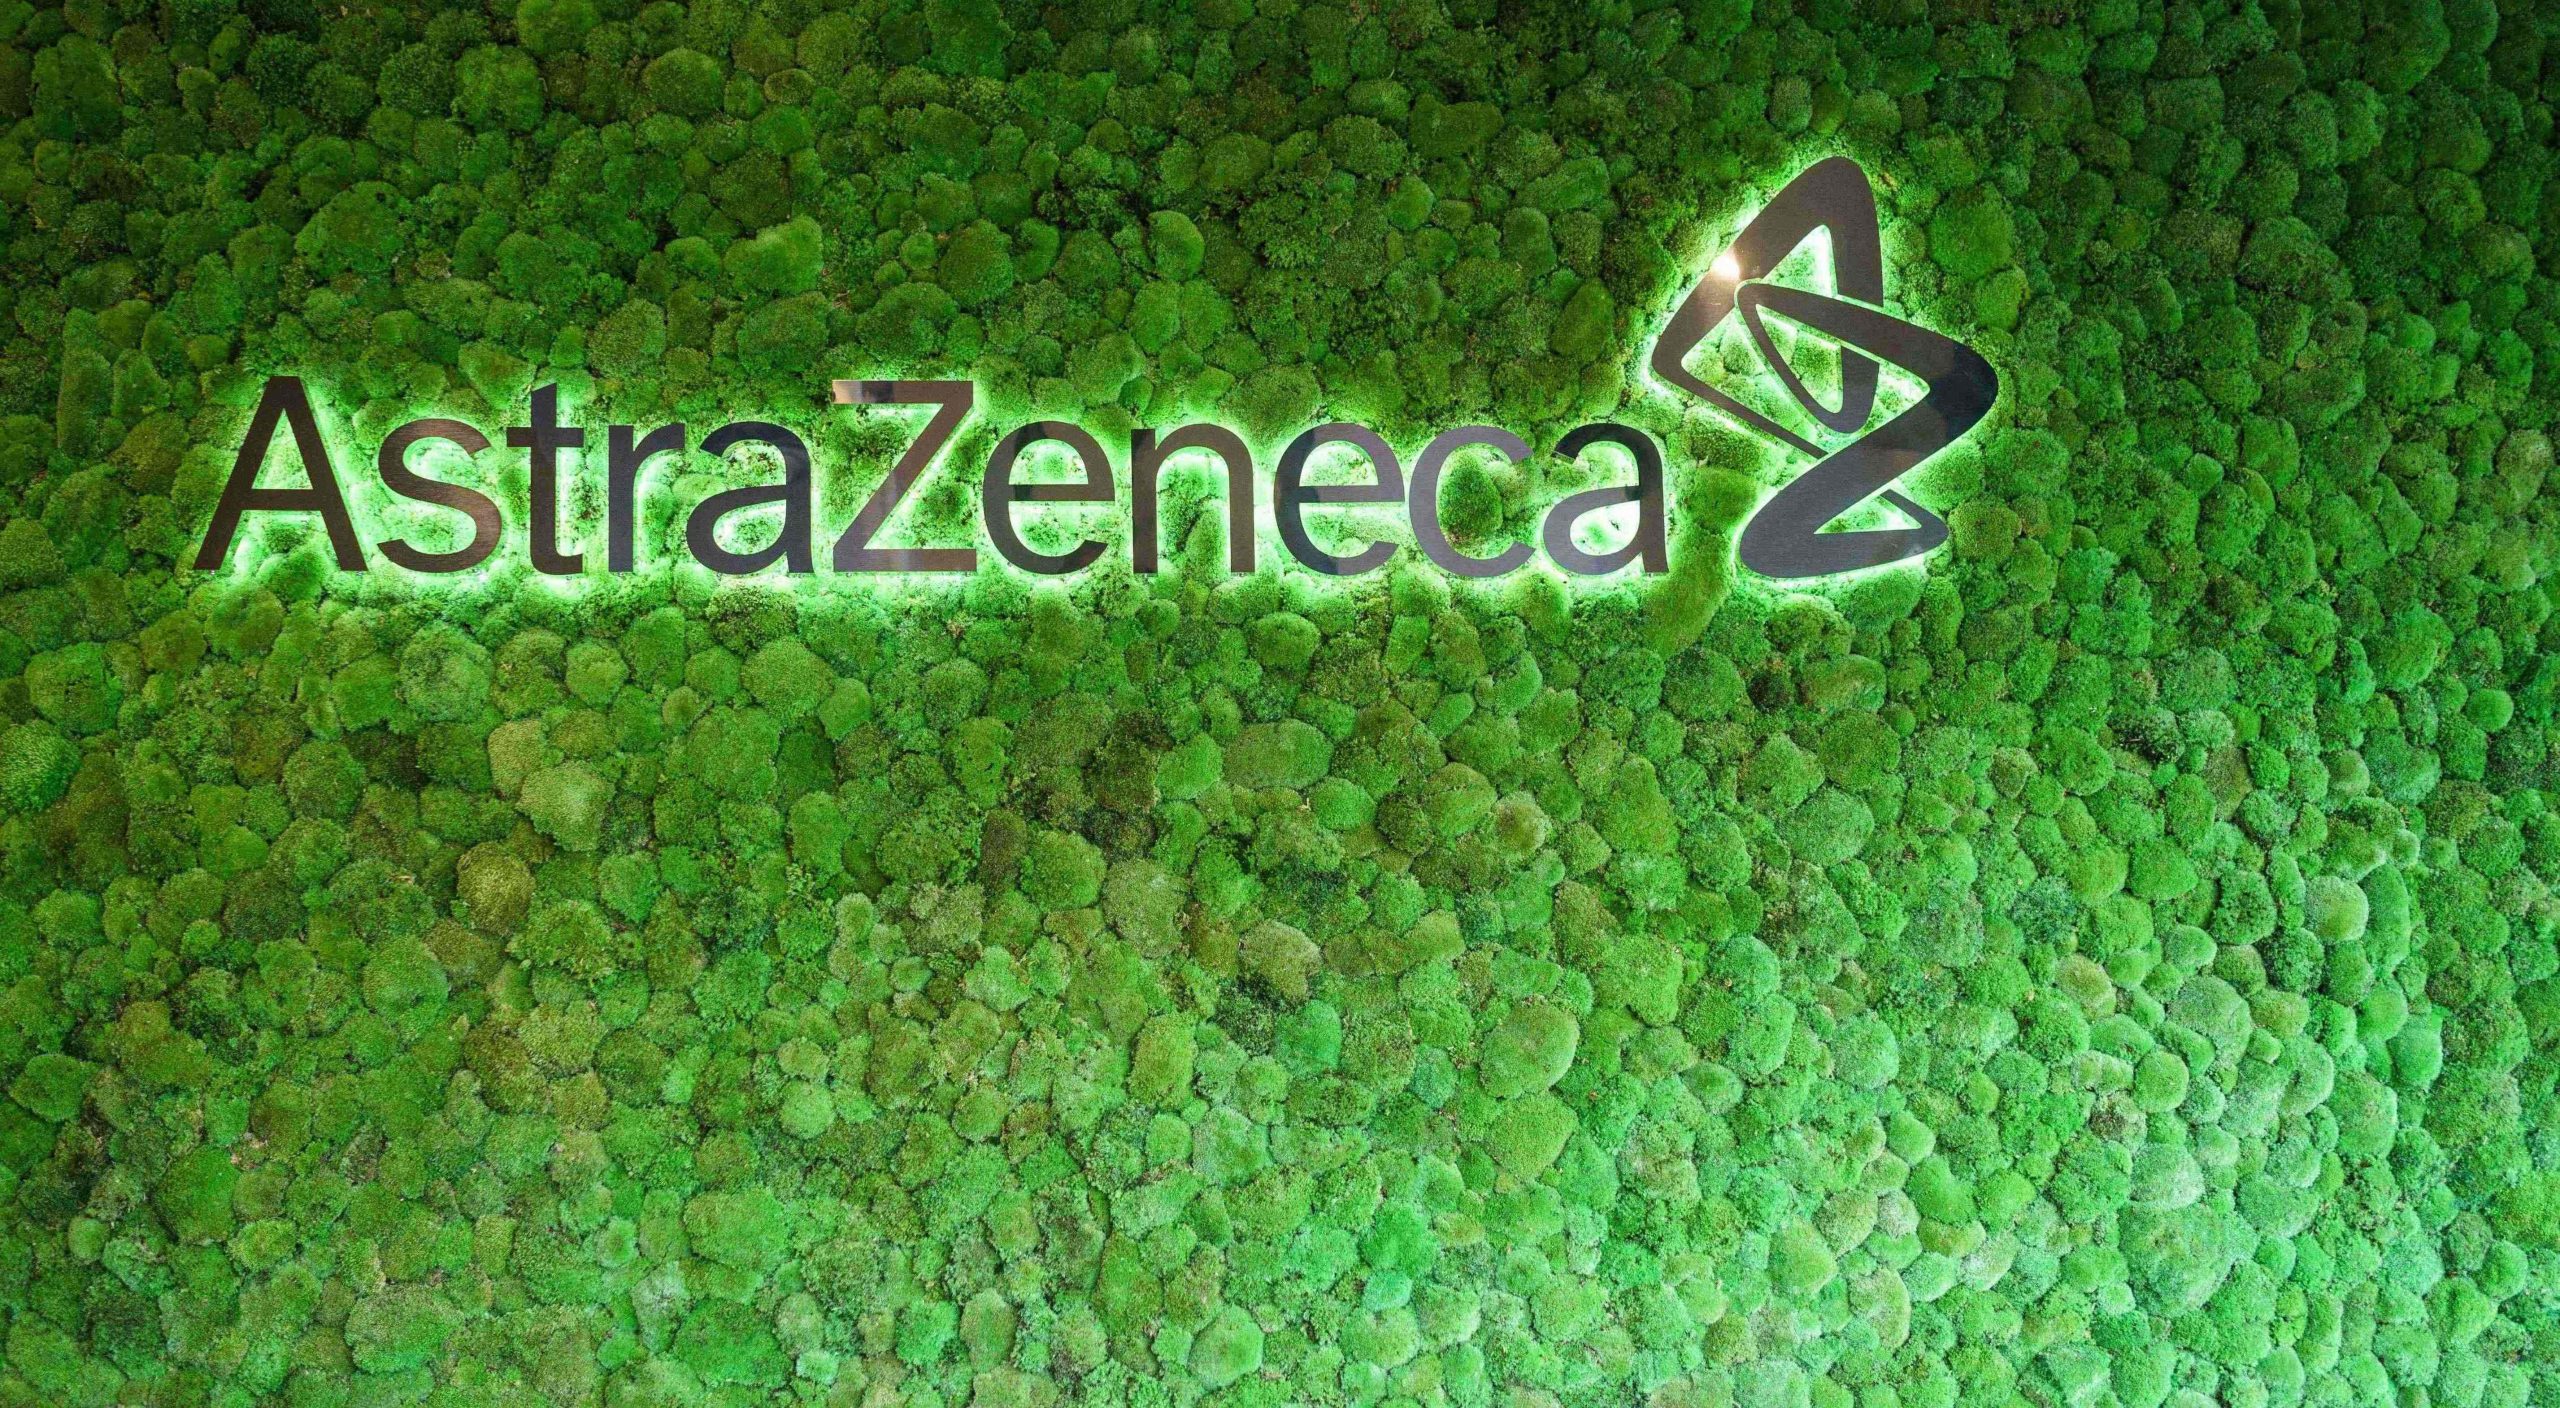 How we take care of at AstraZeneca safety, health and the environment